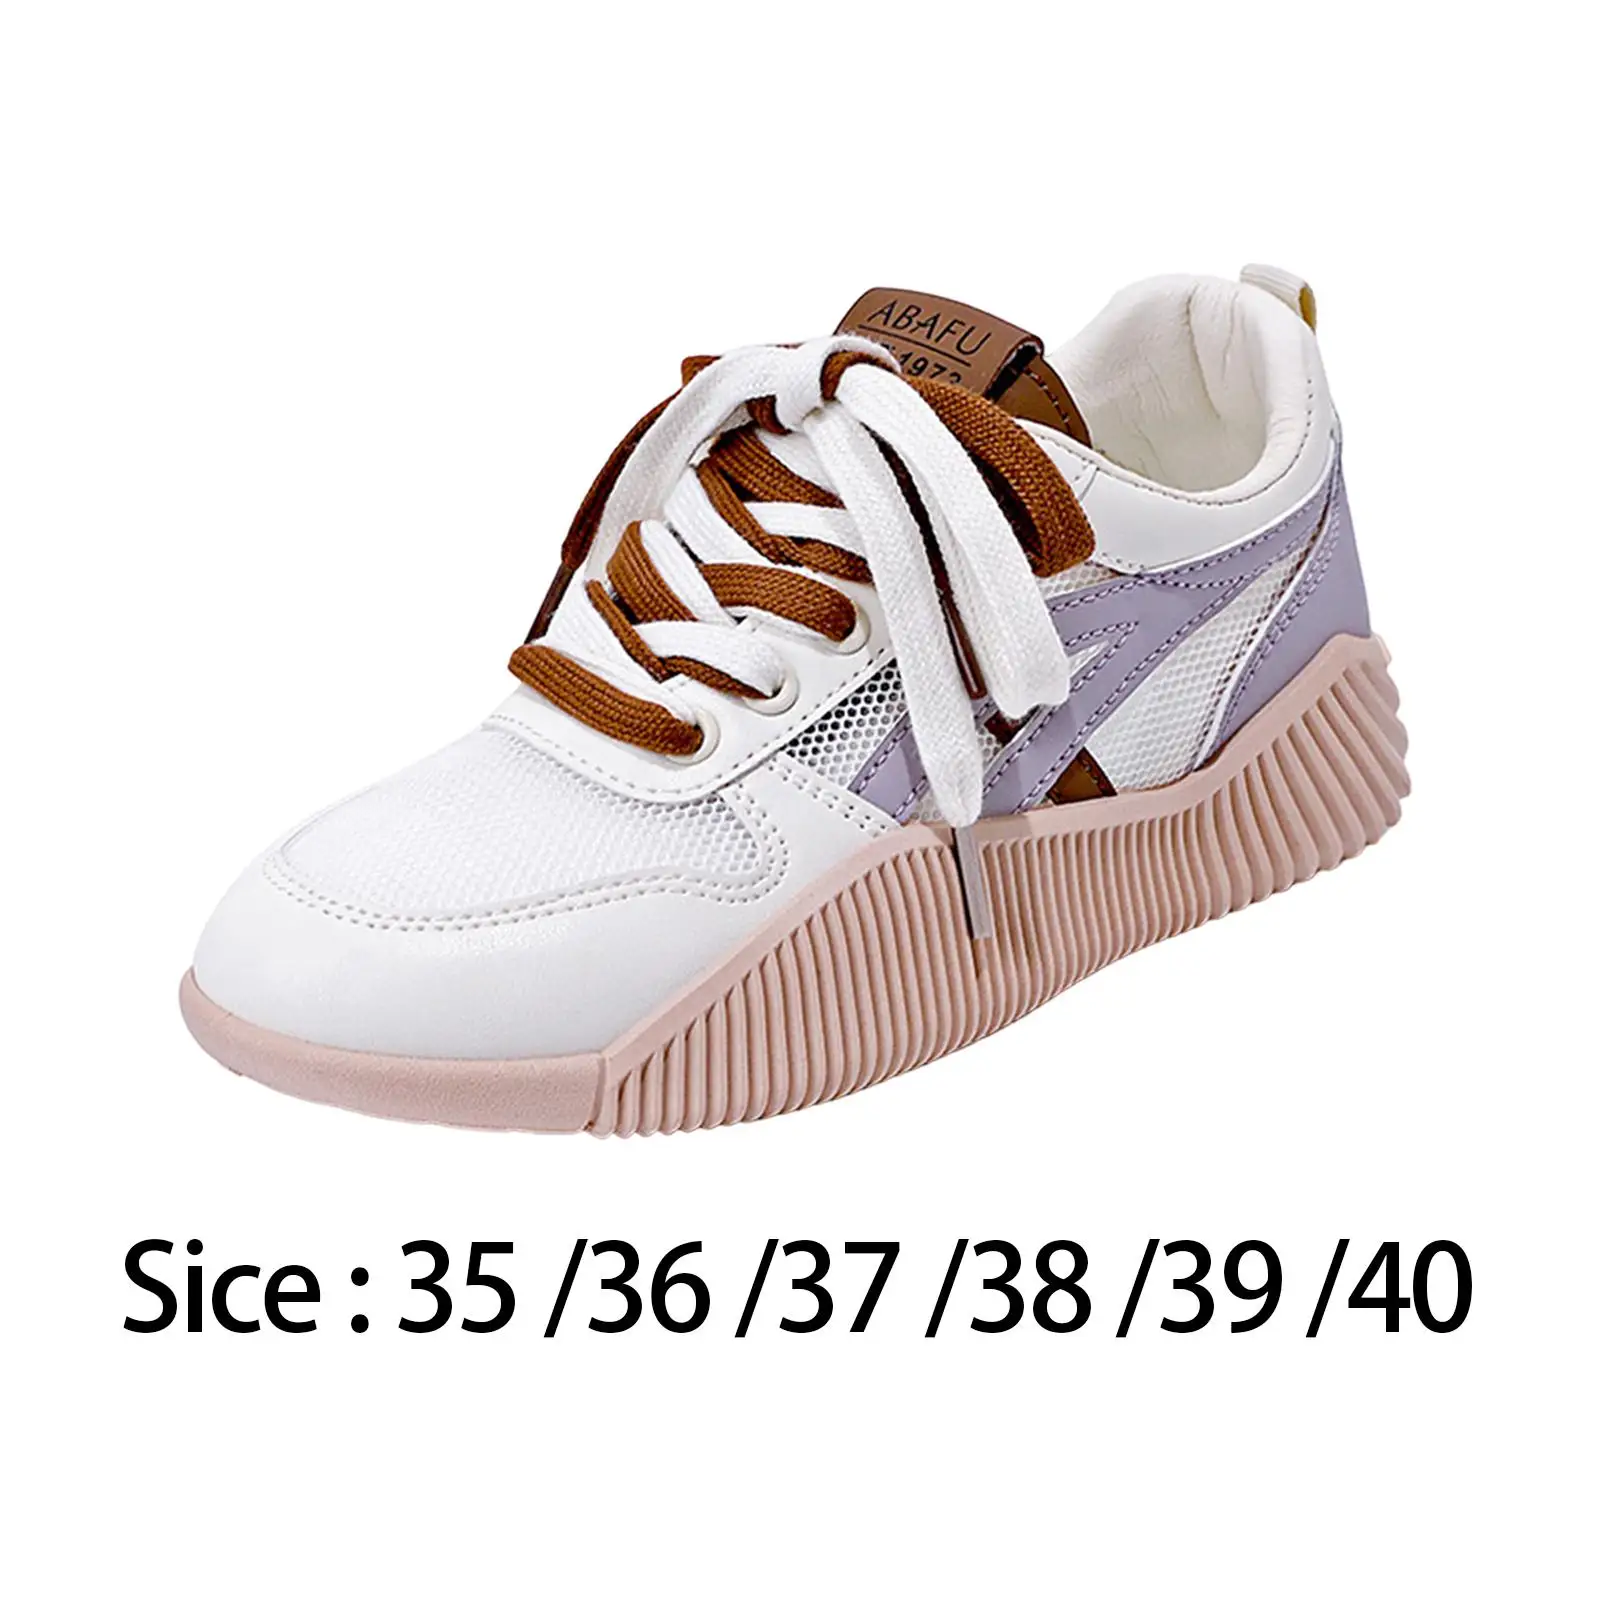 Women Platform Sneakers Comfortable Sports Shoes PU Upper Fashion Trainers